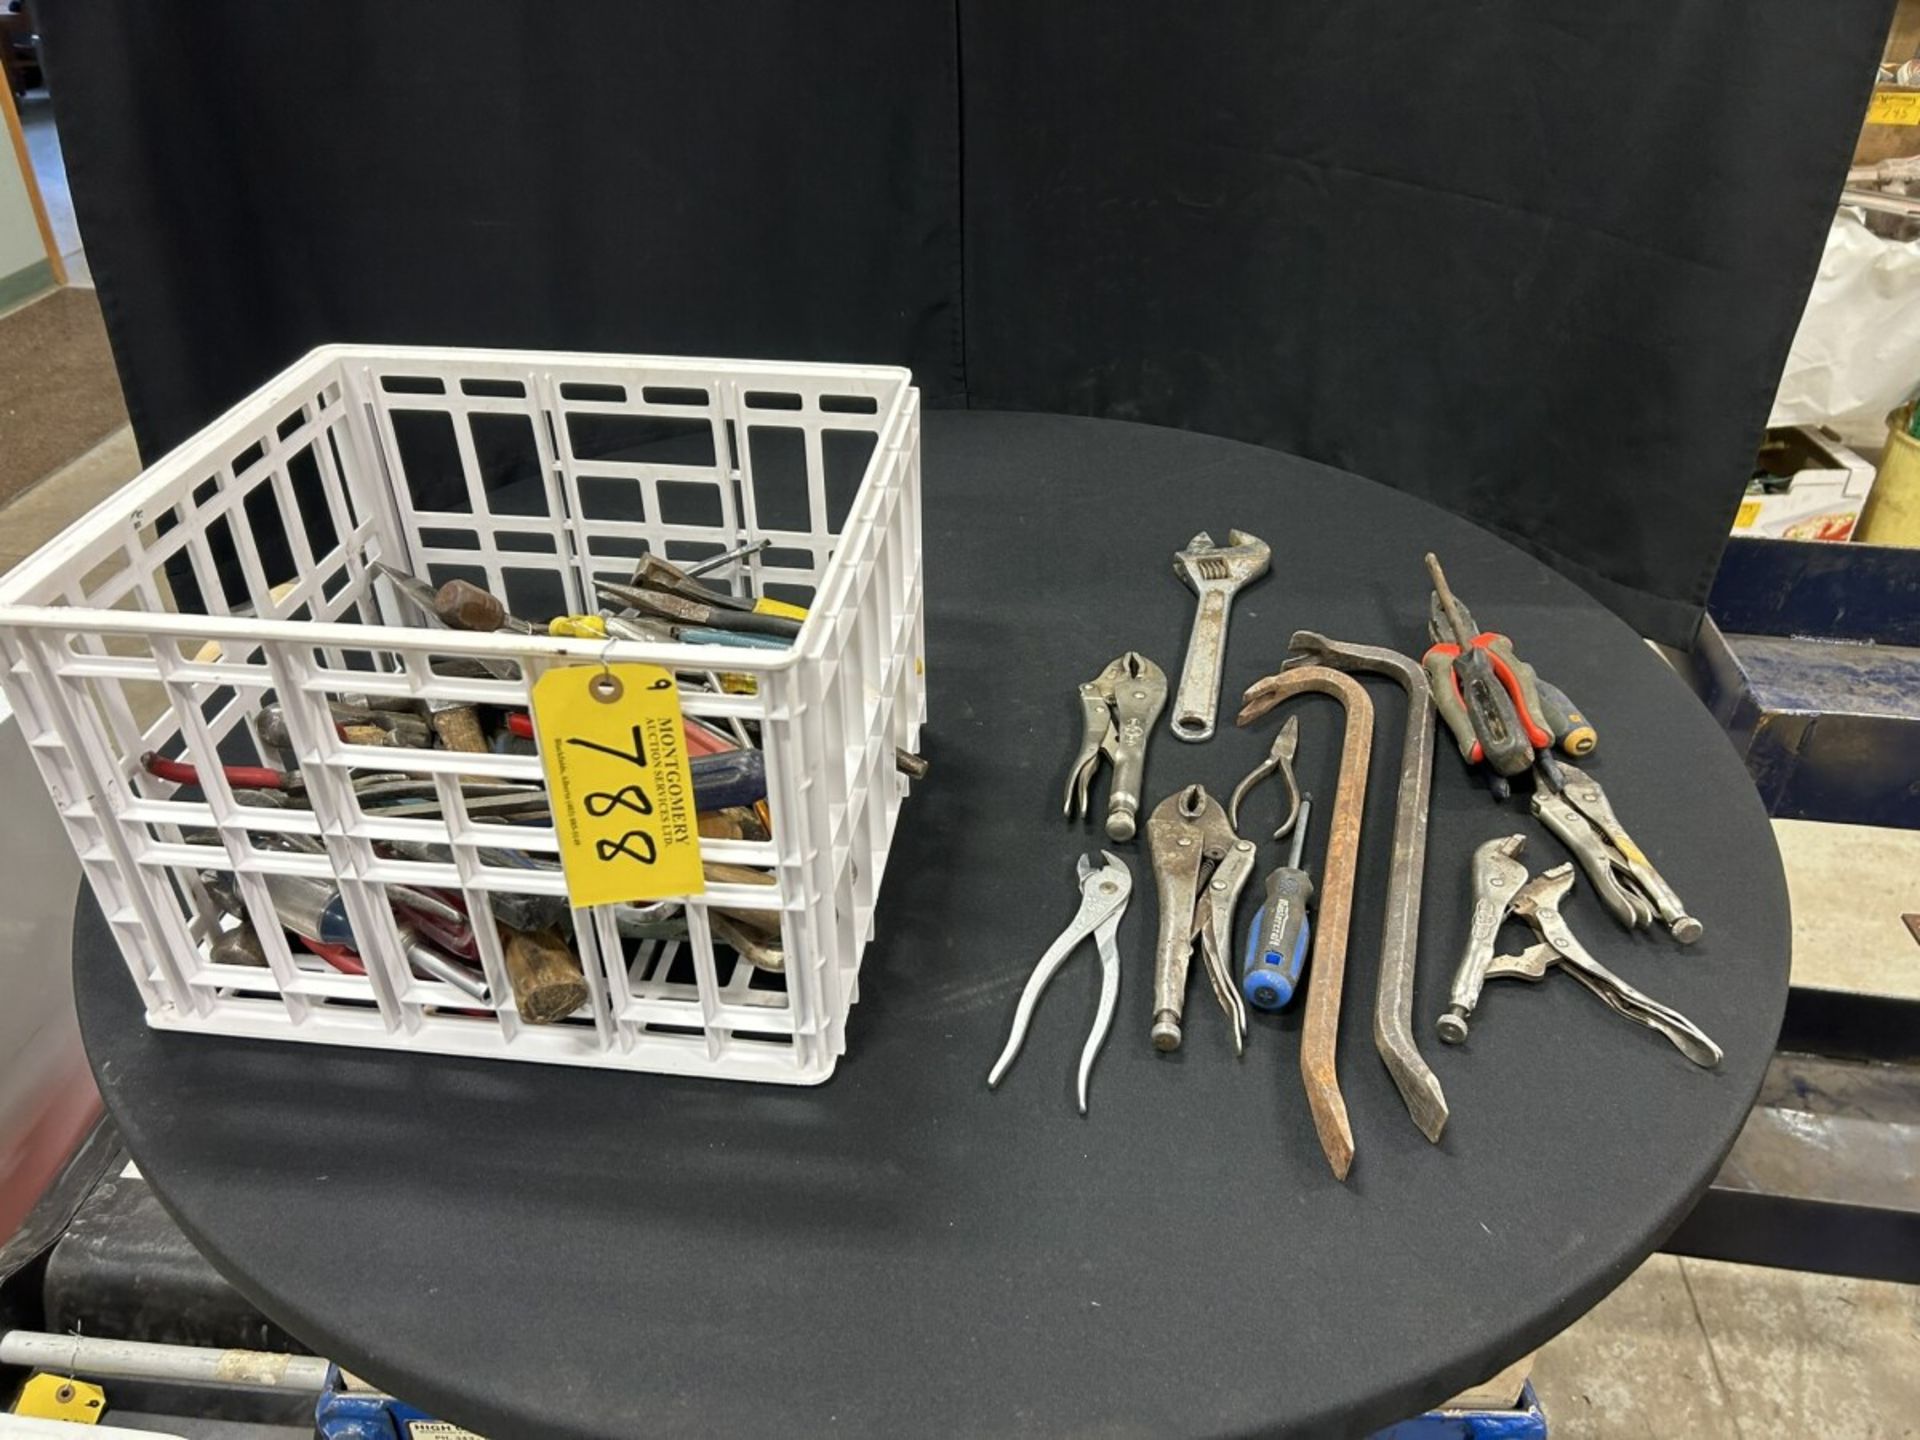 ASSORTED HAND TOOLS, CRESCENT WRENCHES, PLIERS, SCREWDRIVERS, ETC…